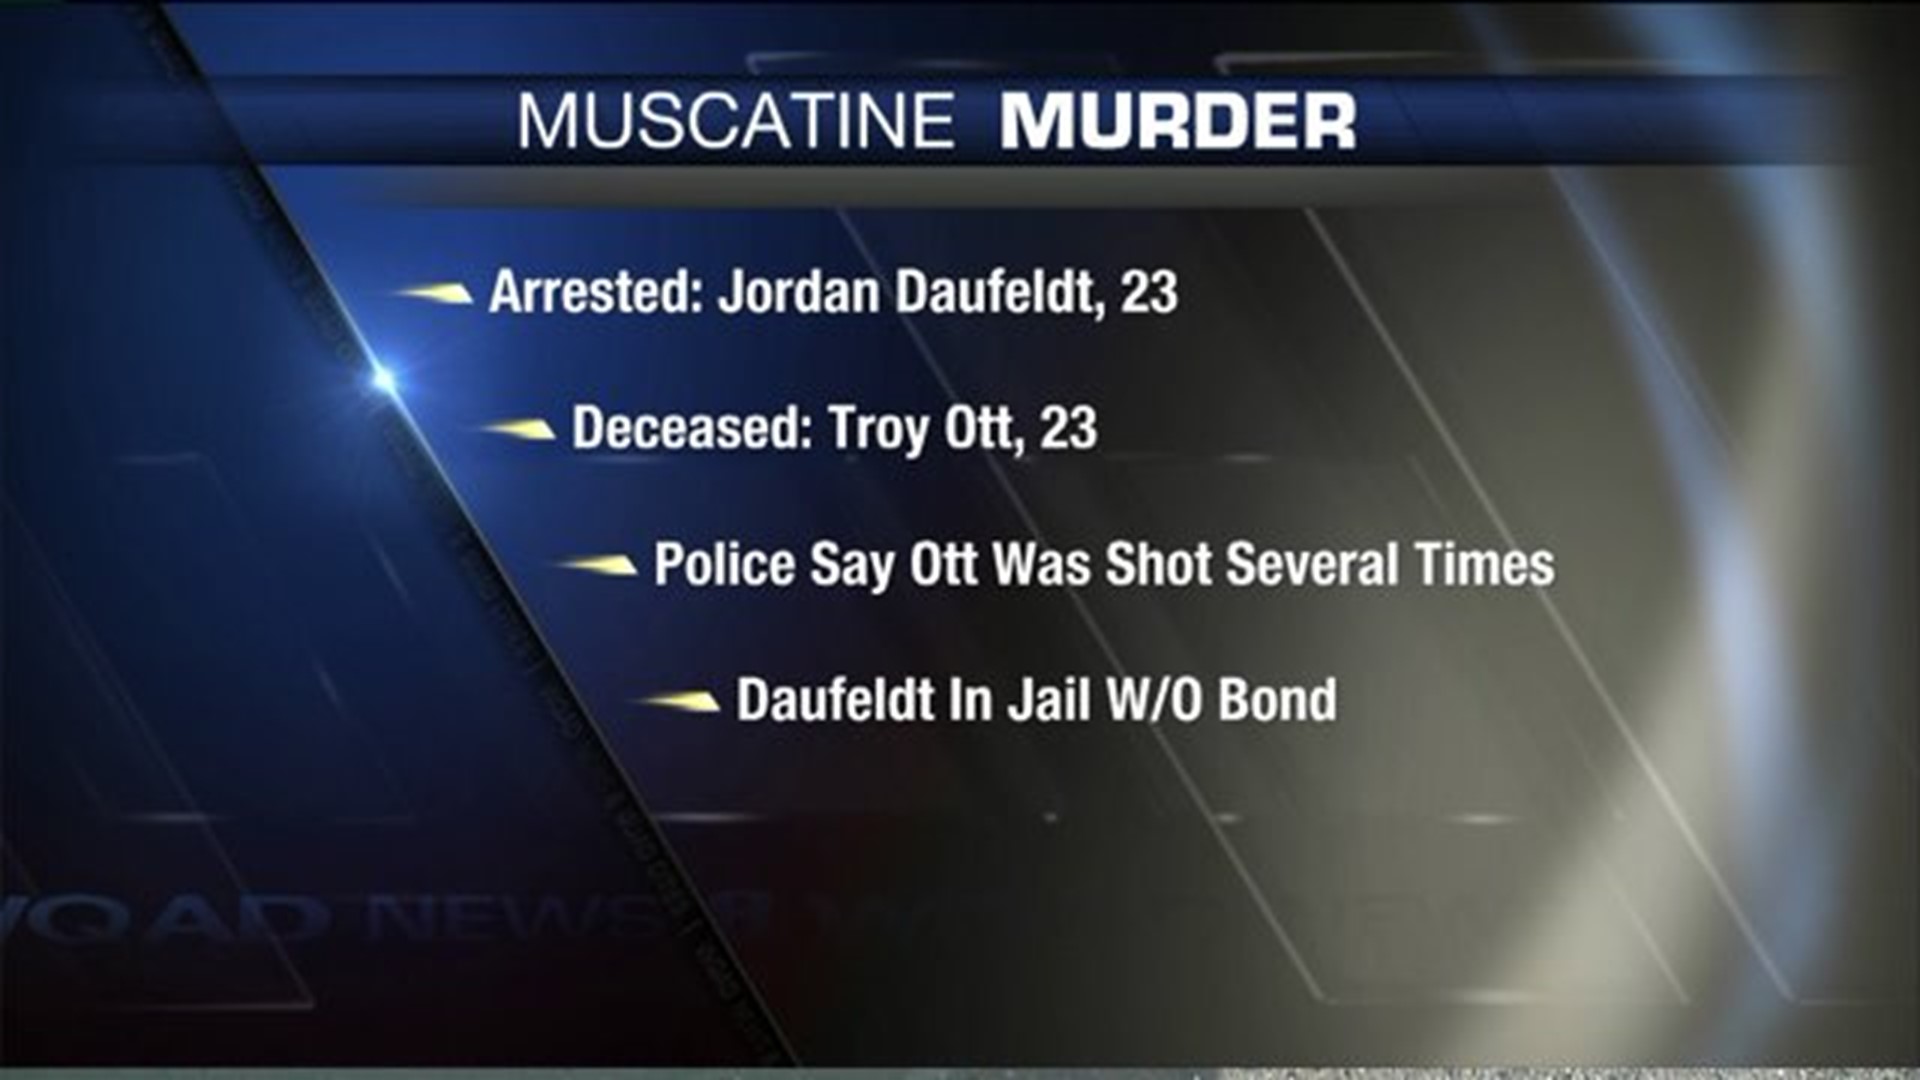 Man accused of first degree murder after shooting in Muscatine